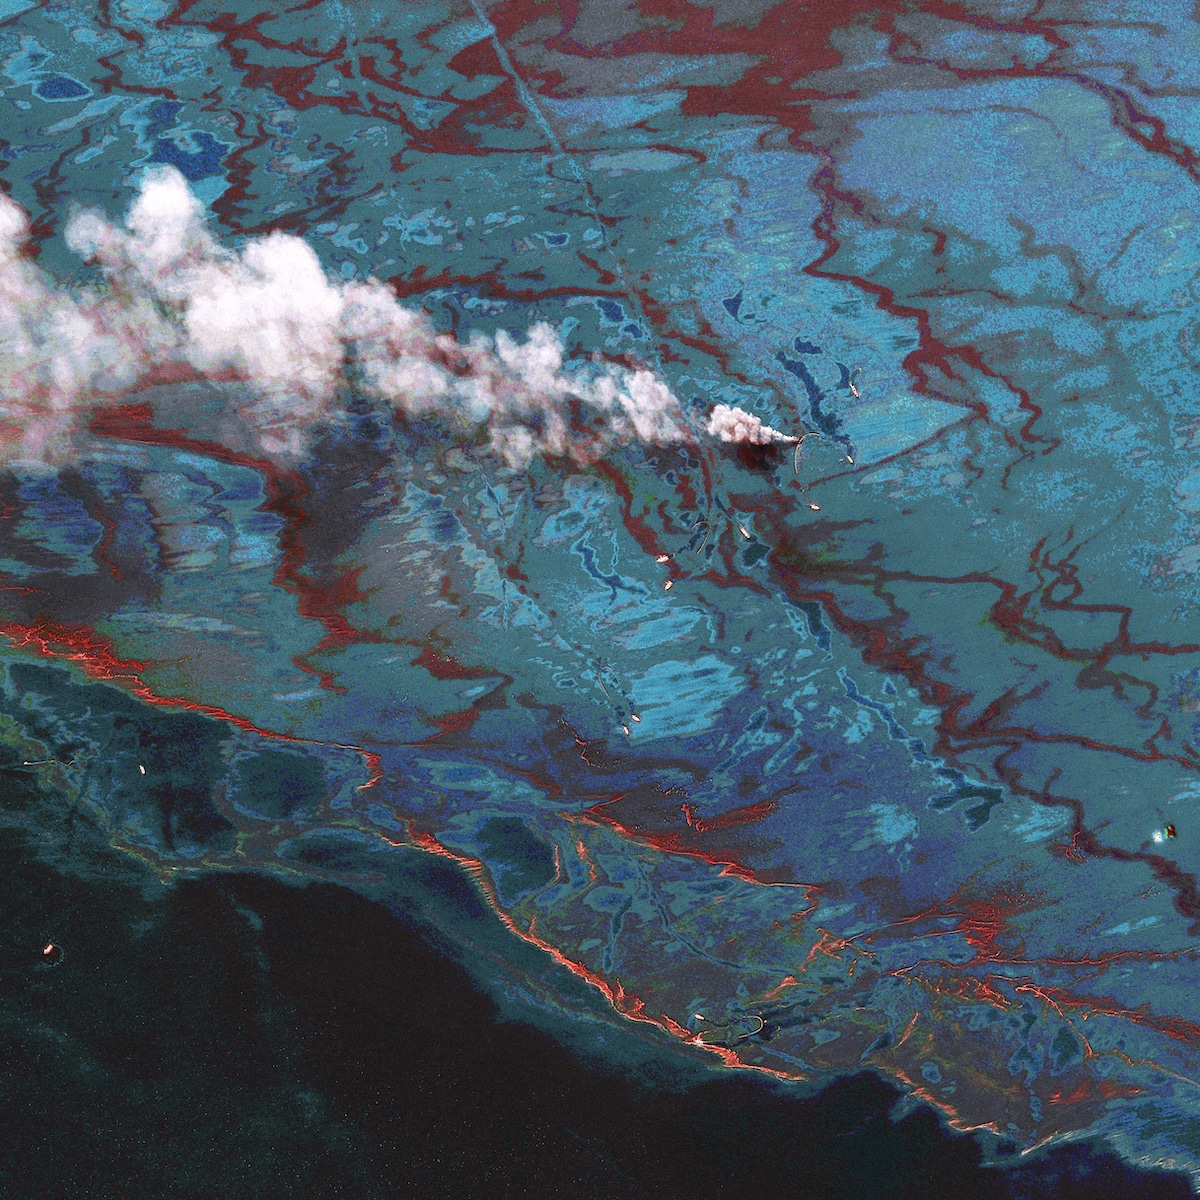 Satellite image of the Gulf of Mexico after BP's oil spill disaster in 2010